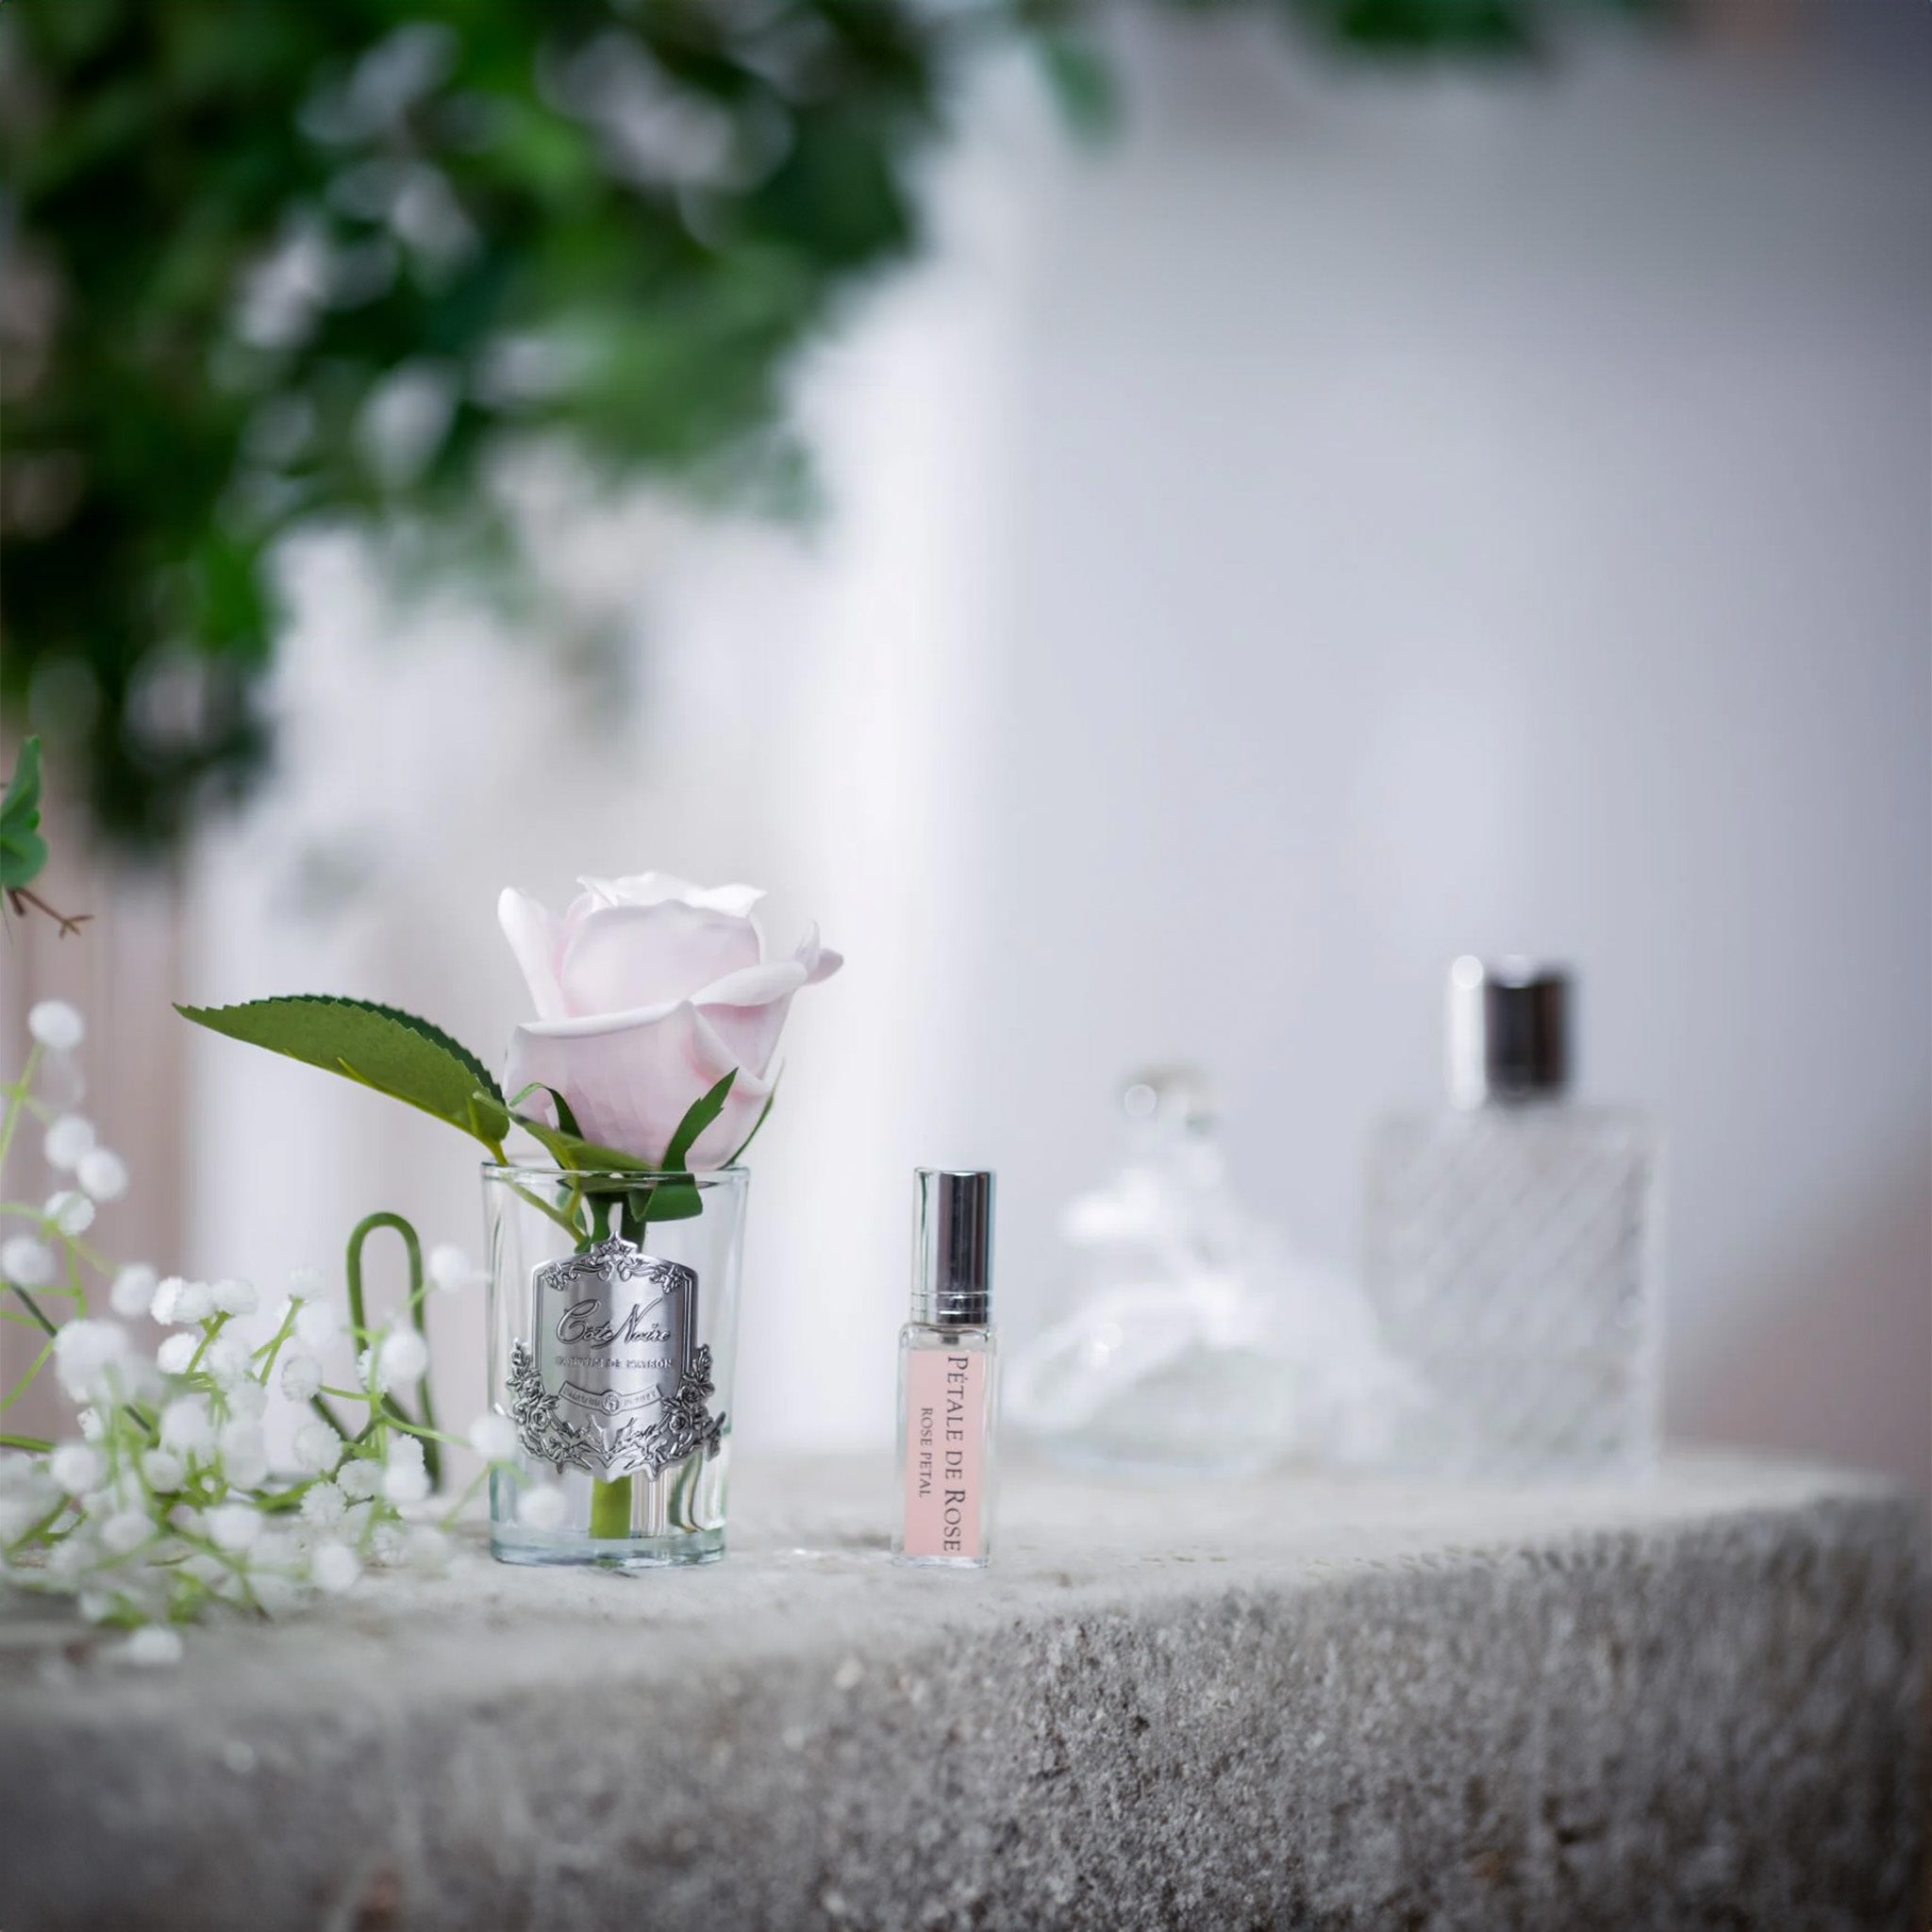 a french pink rose by cote noire in a glass vase with a fragrance bottle on a stone surface